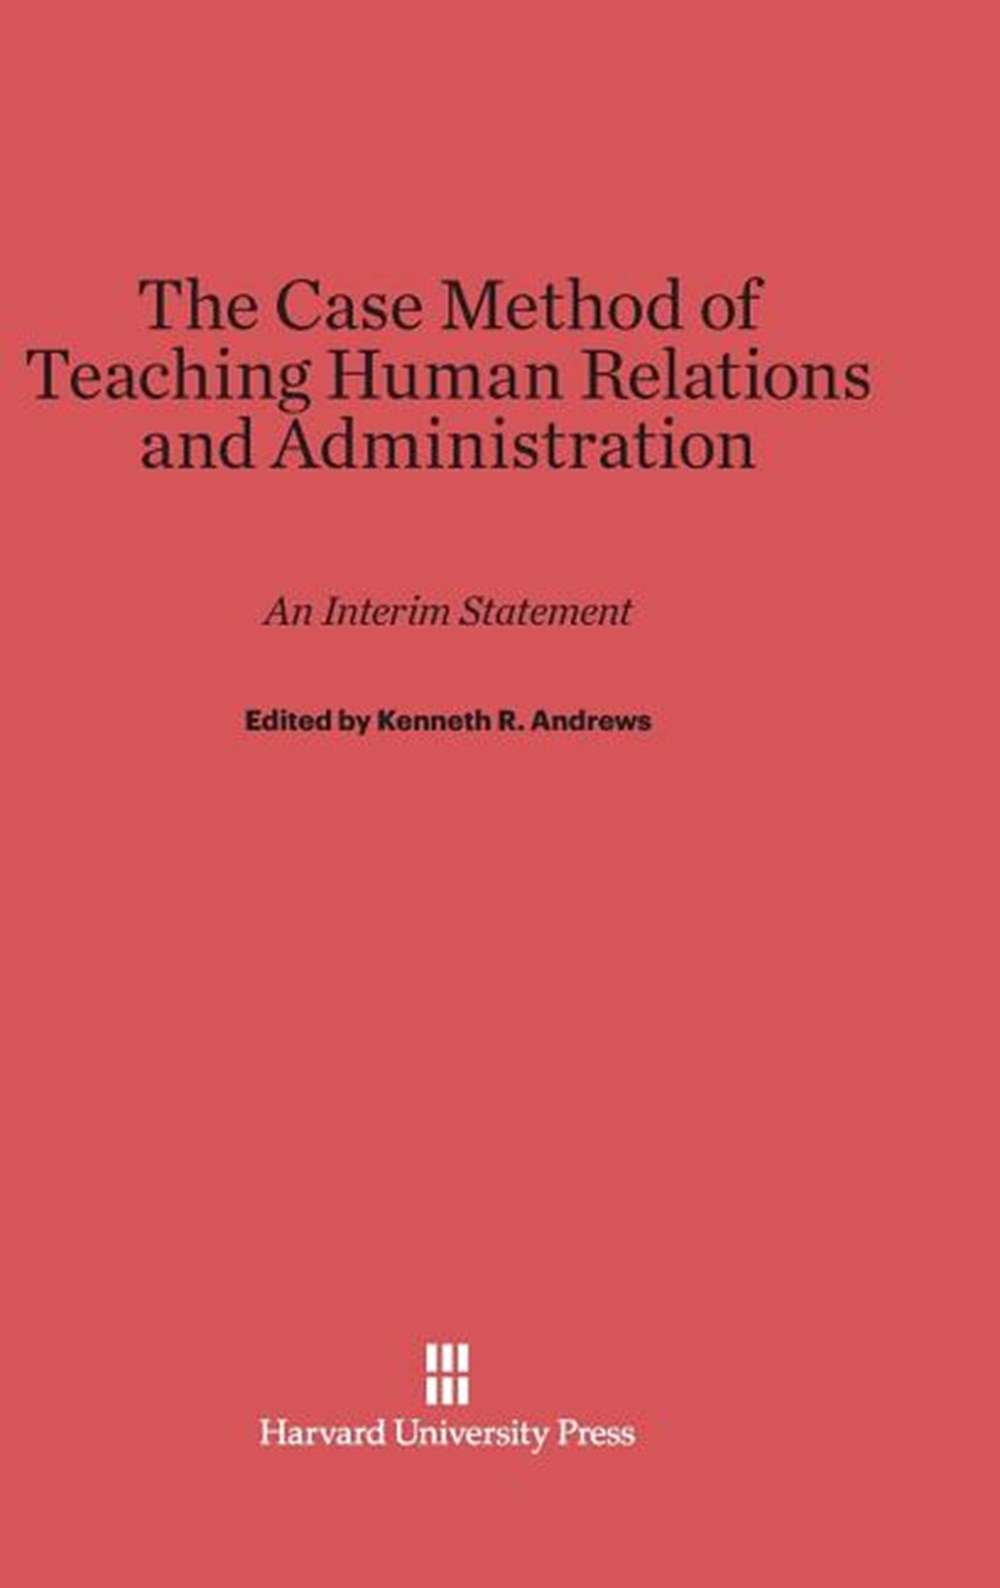 Case Method of Teaching Human Relations and Administration: An Interim Statement (Reprint 1953. Repr